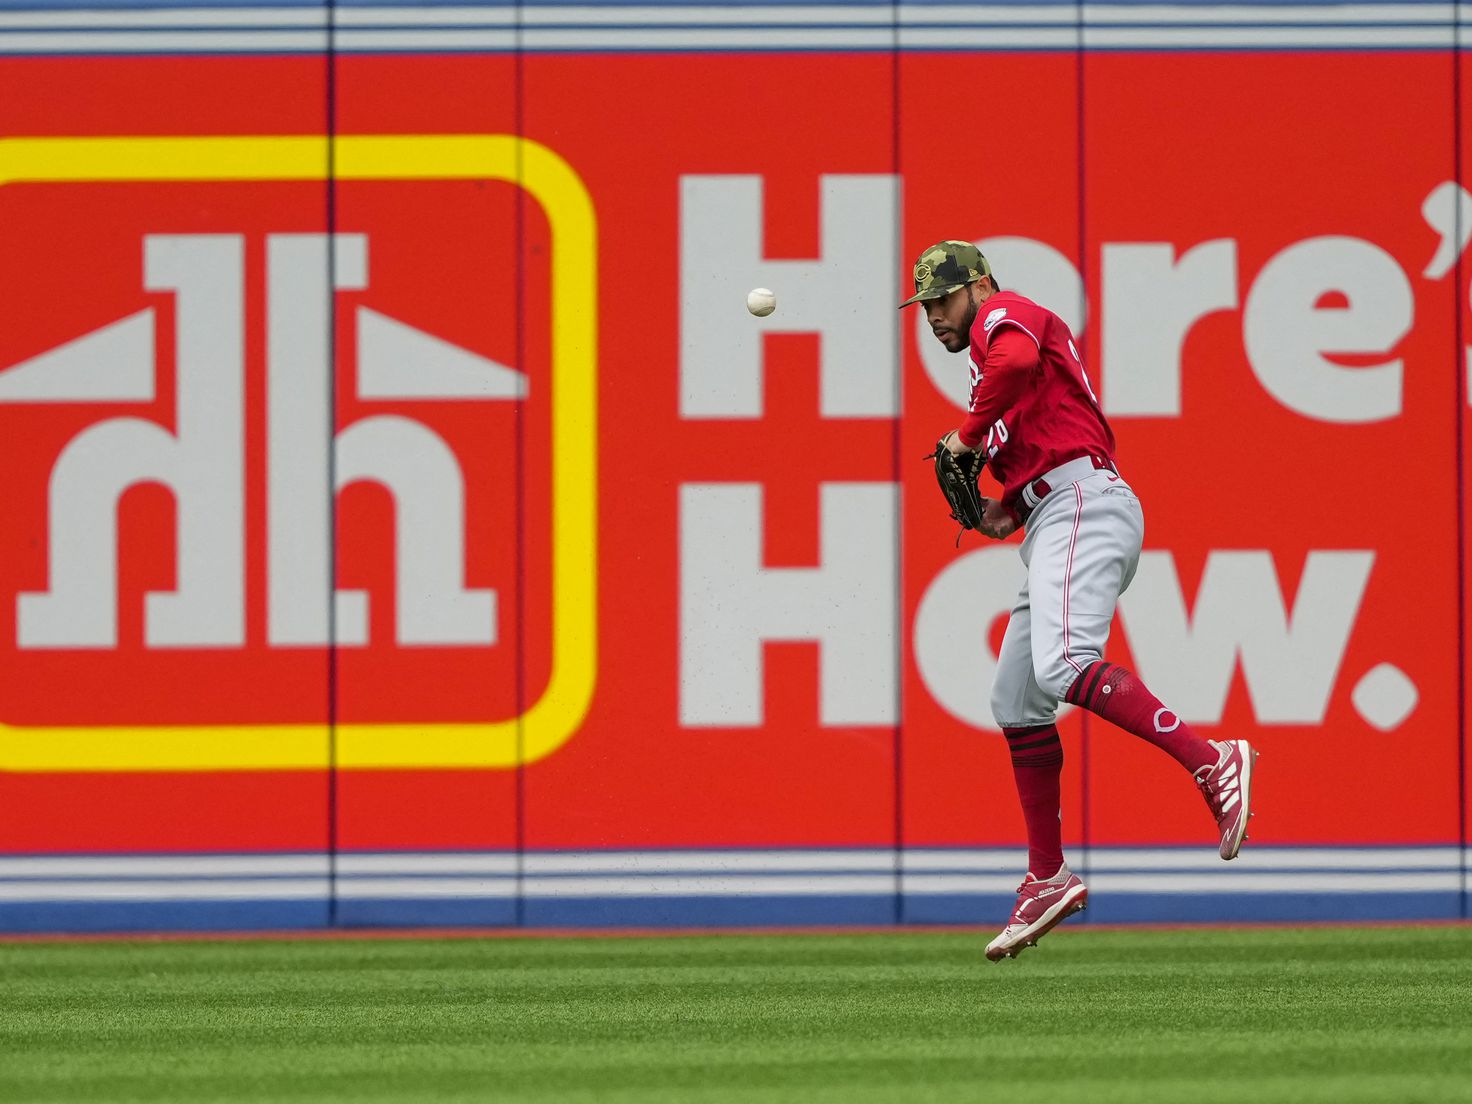 Tommy Pham suspended three games for slapping Joc Pederson